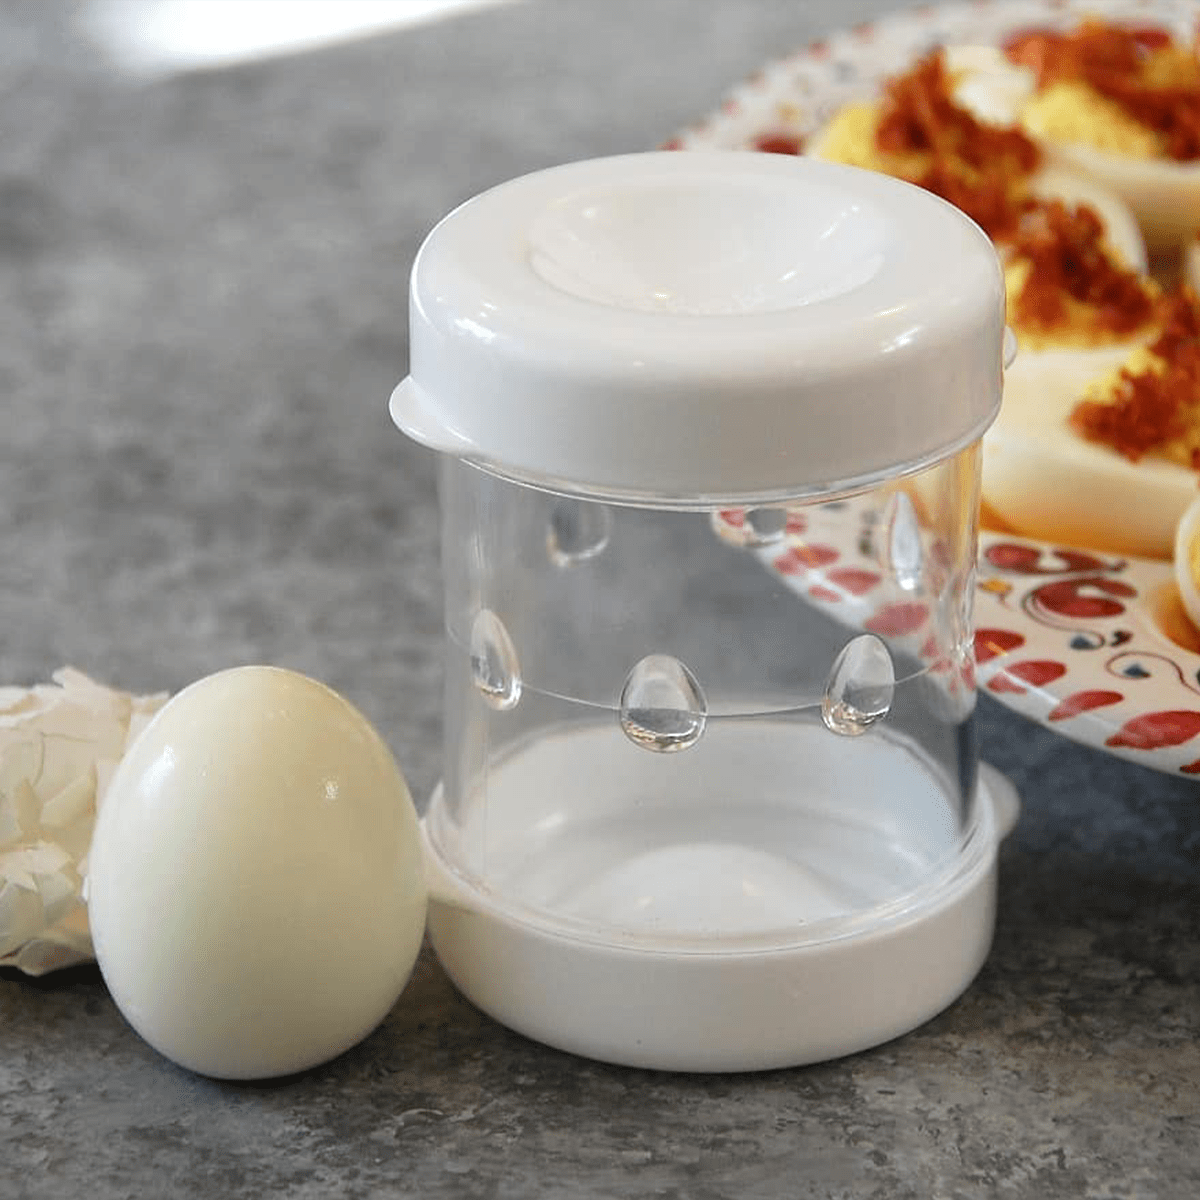 Hard-Boiled Egg Peeler  How to shed an eggshell in seconds. http